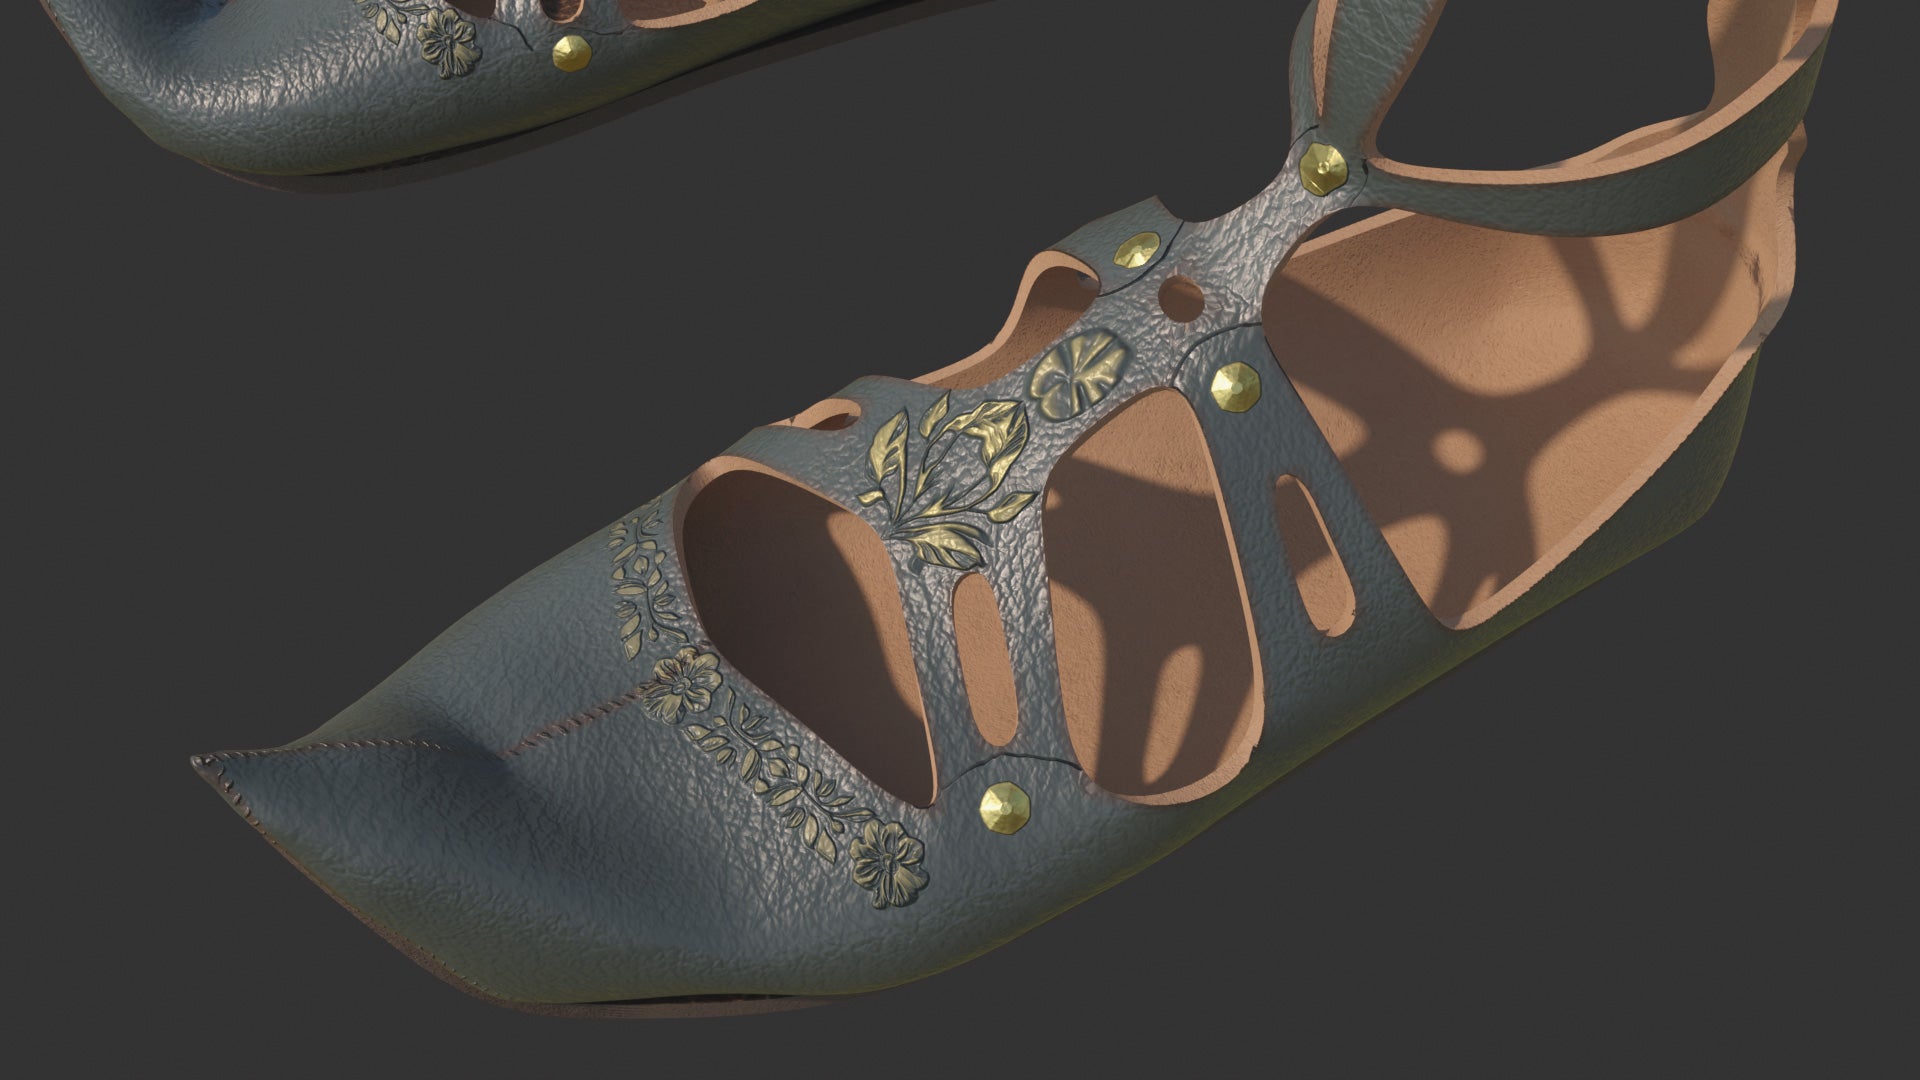 Medieval fantasy shoes / sandals with embossed floral motifs and painted in gold